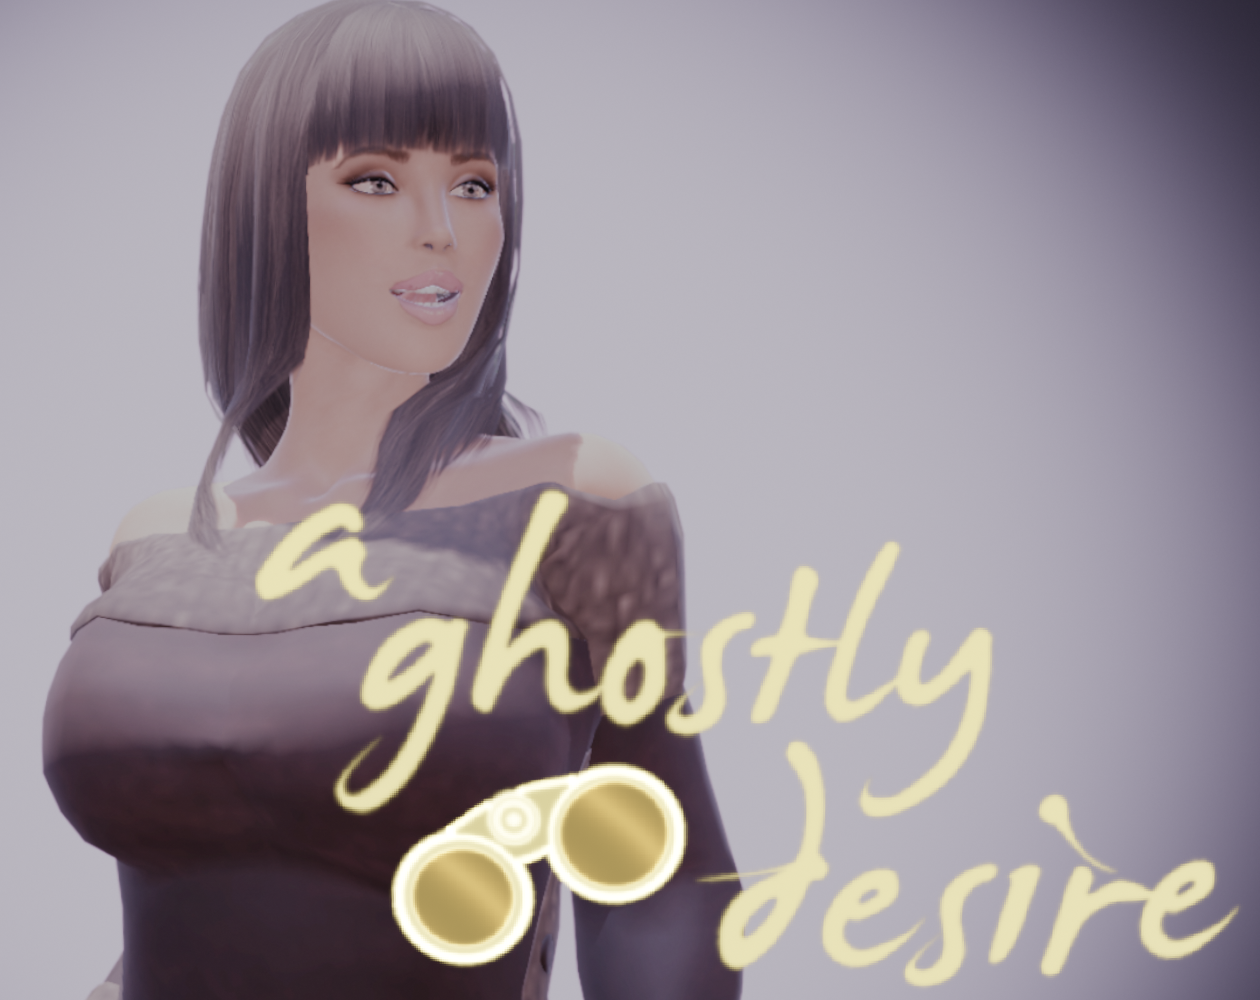 Release] A ghostly desire - Alpha 0.7 - 26Oct23 - [18+] A ghostly